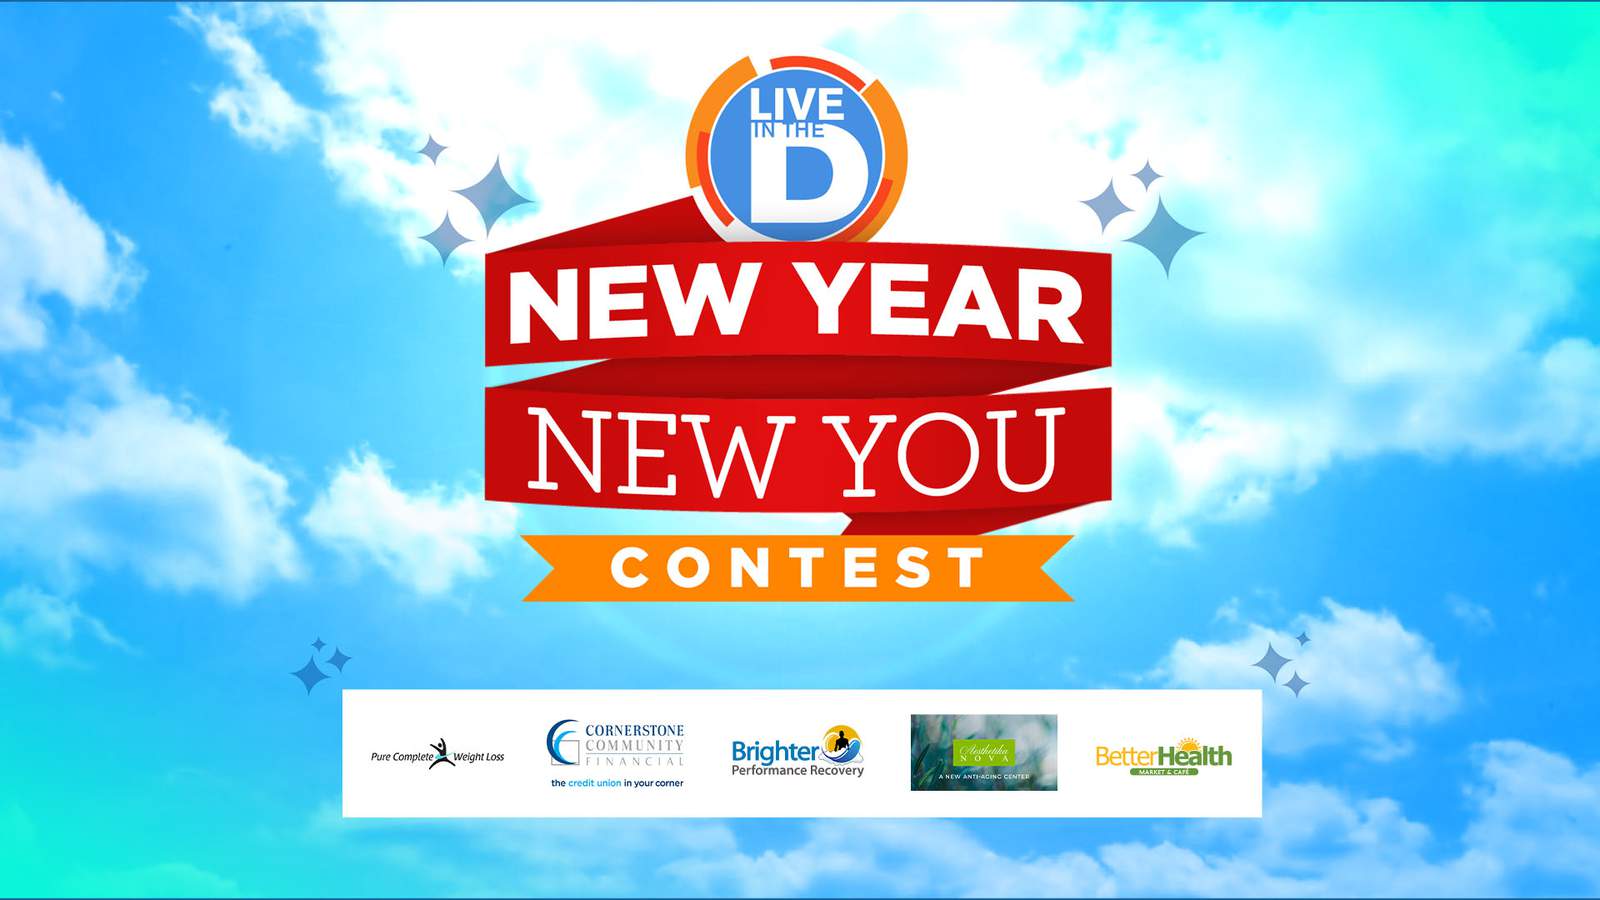 Live In The D’s New Year New You Contest